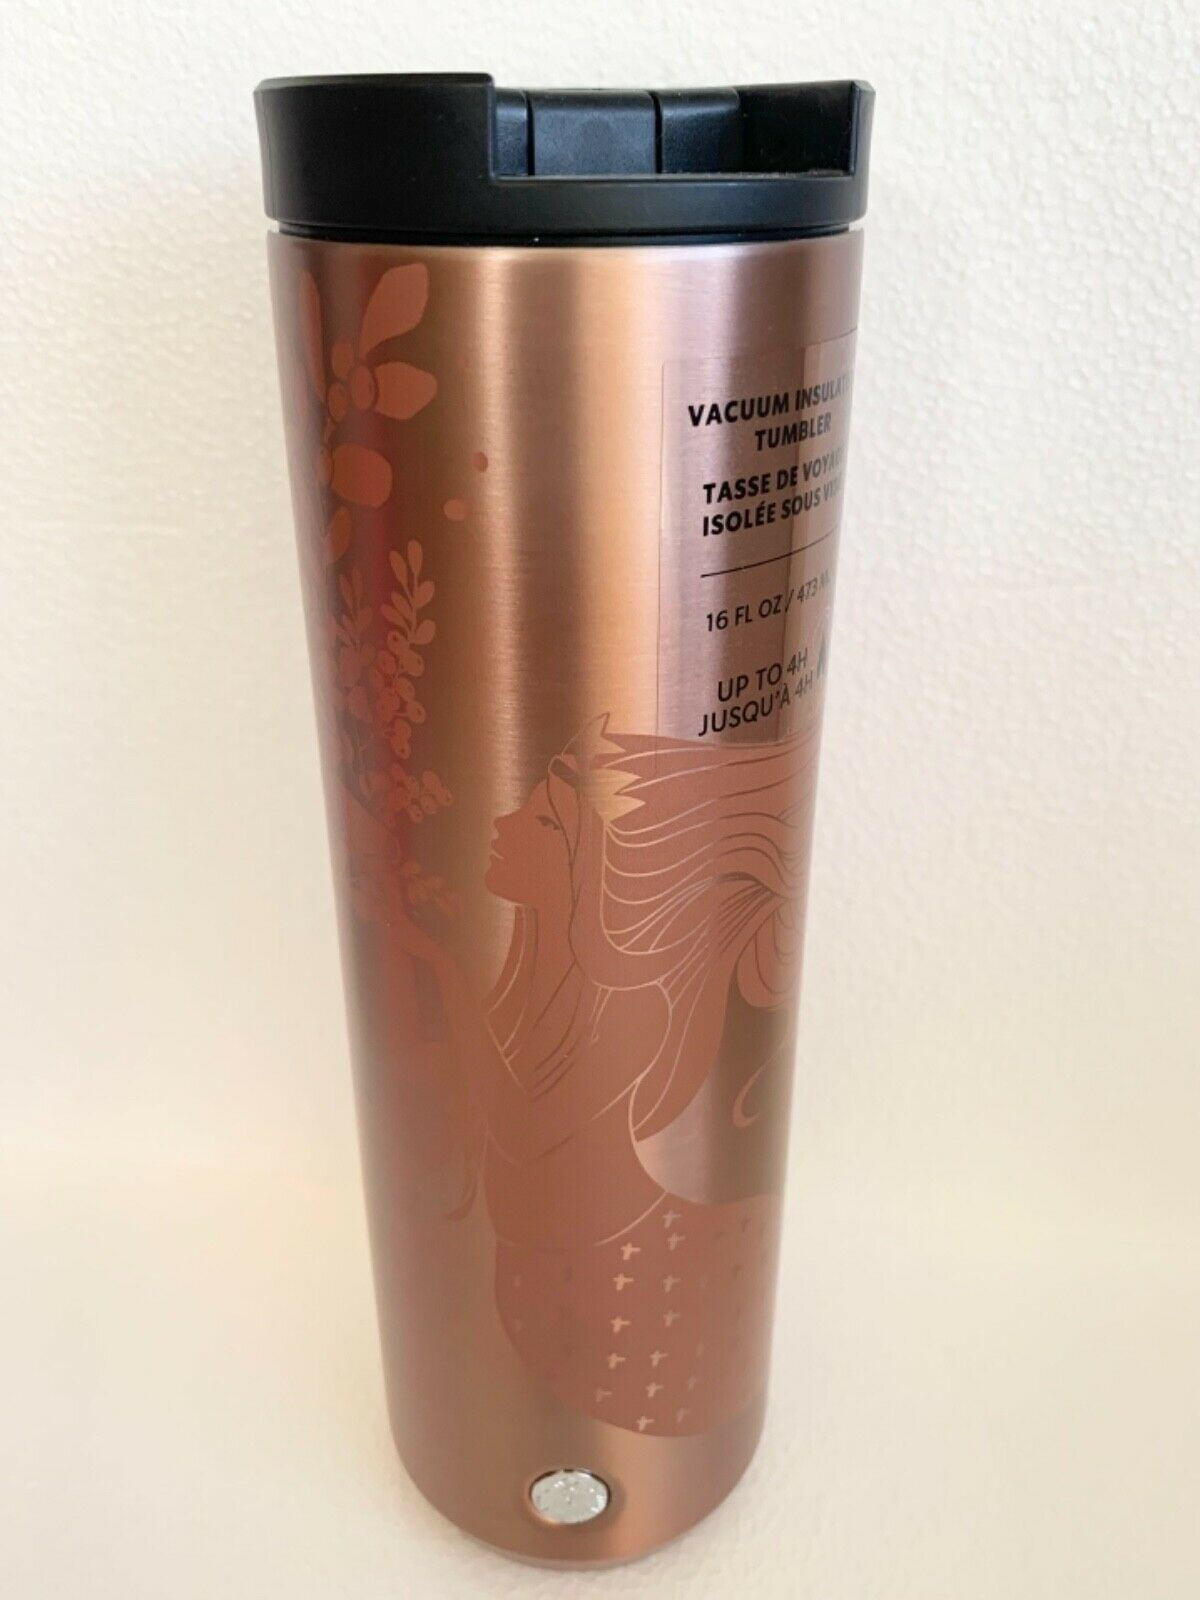 Starbucks Gold Copper Stainless Steel Cold Brew Hot Coffee Tumbler 16 Oz  Grande